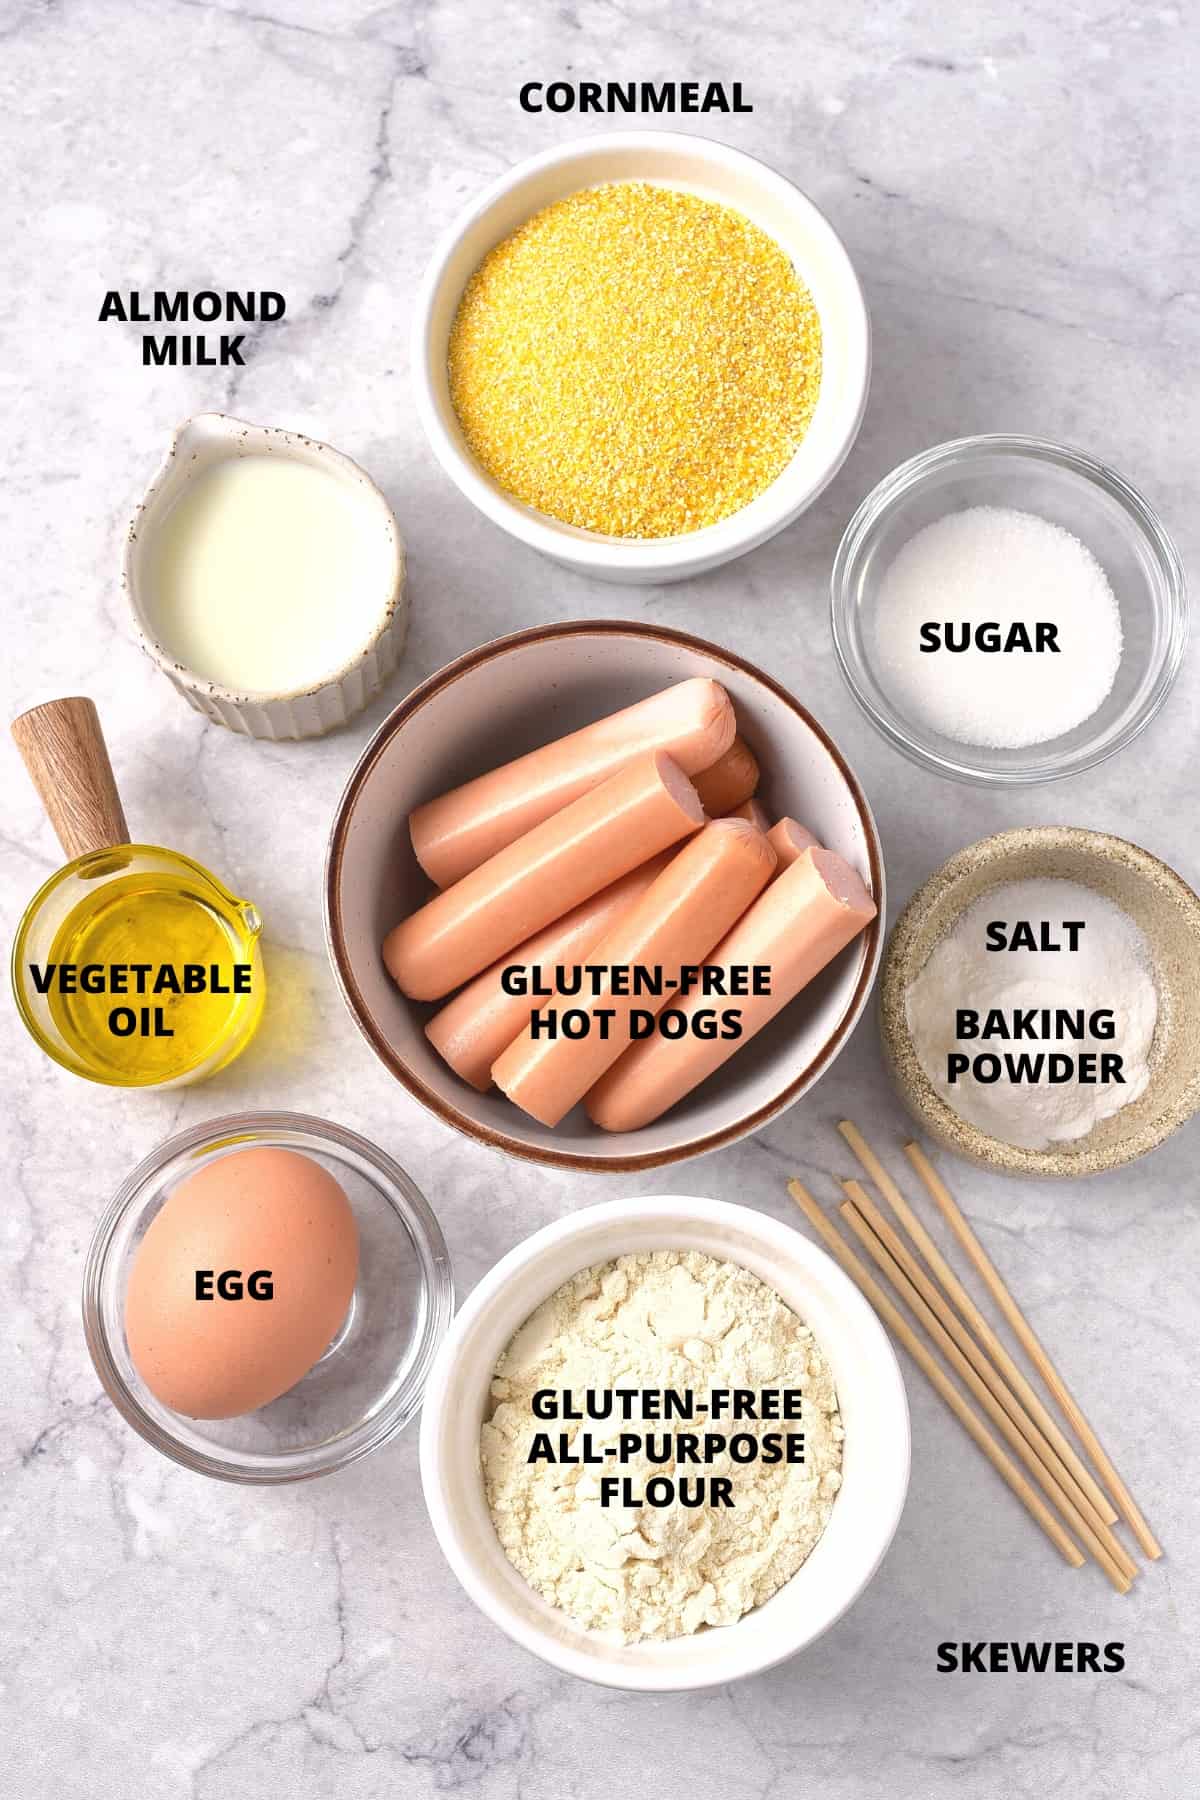 Ingredients for making gluten-free corn dogs laid out on marble board.